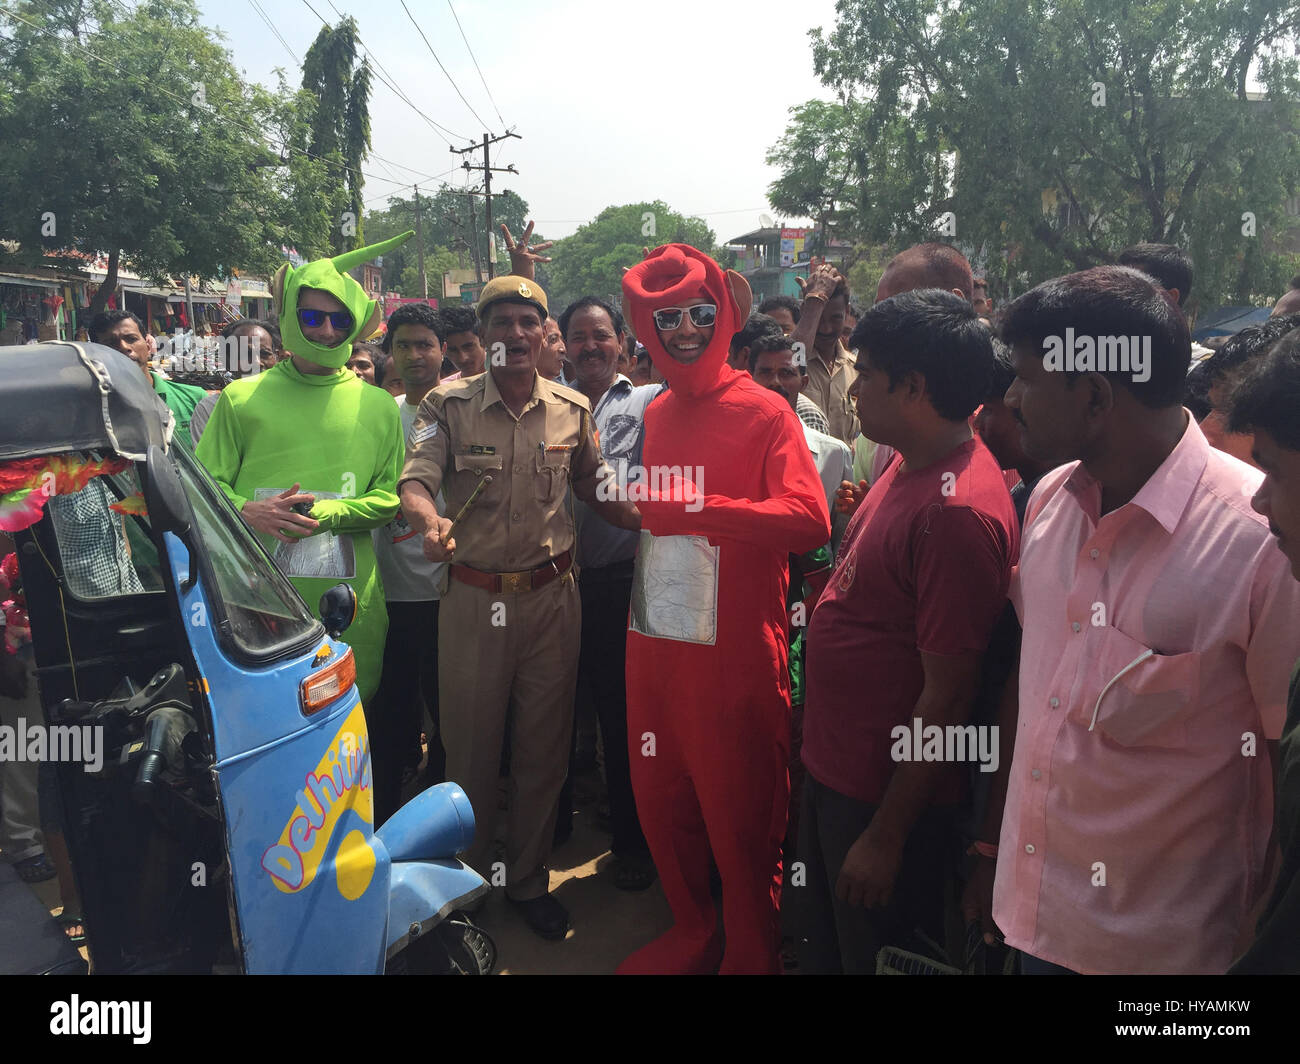 Tyler Newman (left) and Sean Newlan (right) pose with a policeman and local people. THREE BRITONS are saying E-OH to the Subcontinent by taking on the eccentric challenge of crossing India on a rickshaw dressed as the iconic children’s television characters the Teletubbies. Driving 2,000miles on pothole infested dirt roads from the “Golden City” of Jaisalmer in the state of Rajastan to the station of Shillong in the Himalayas pictures show how locals responded to the wacky-costumed trio who hope to raise £30K for a women’s refuge in Bangladesh. Led by estate agent Sean Newman (47) and joined b Stock Photo